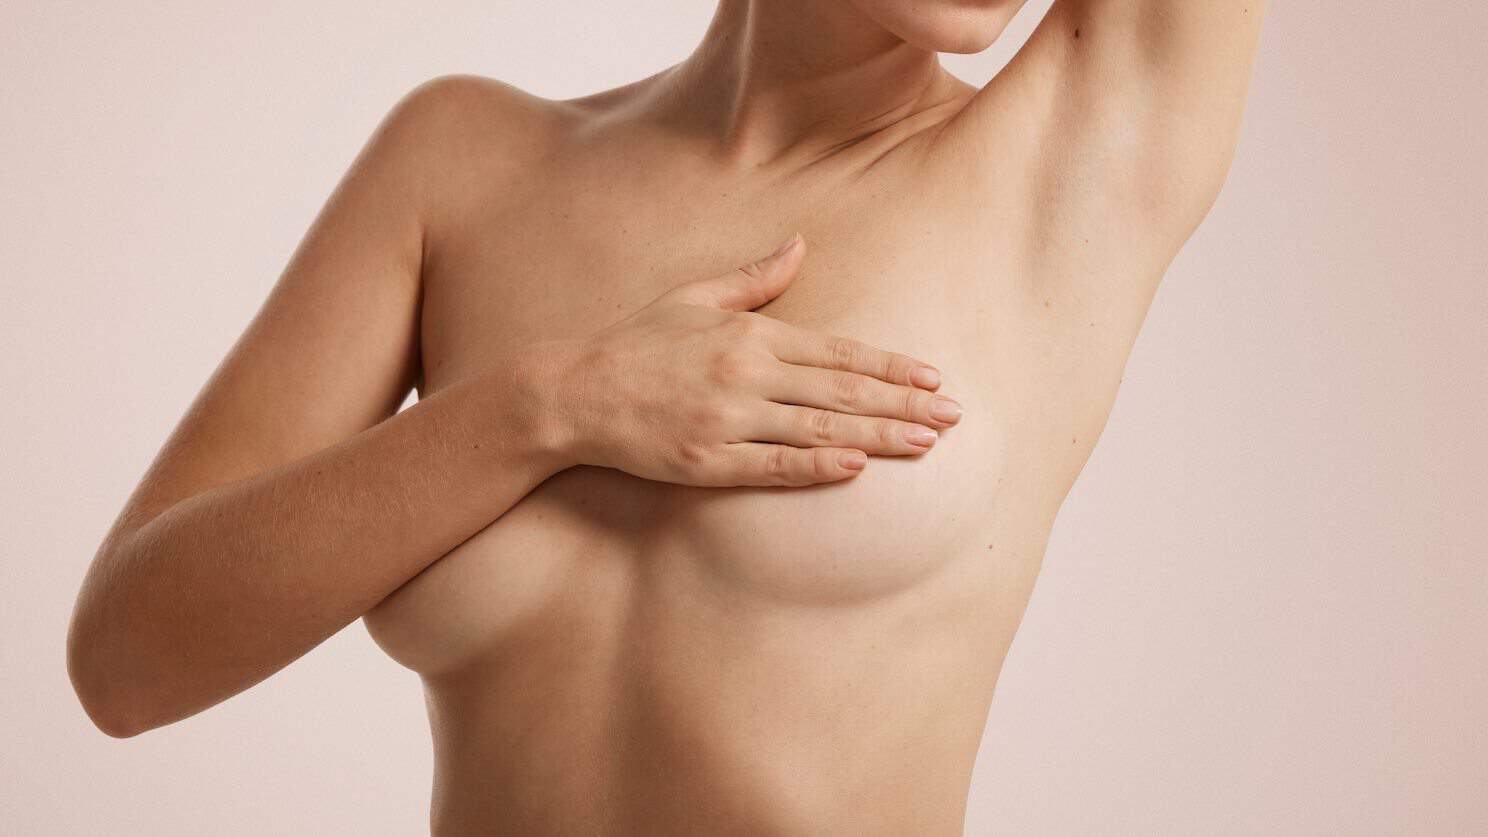 Should Breast Reduction Be Available To Teenagers? - Costhetics